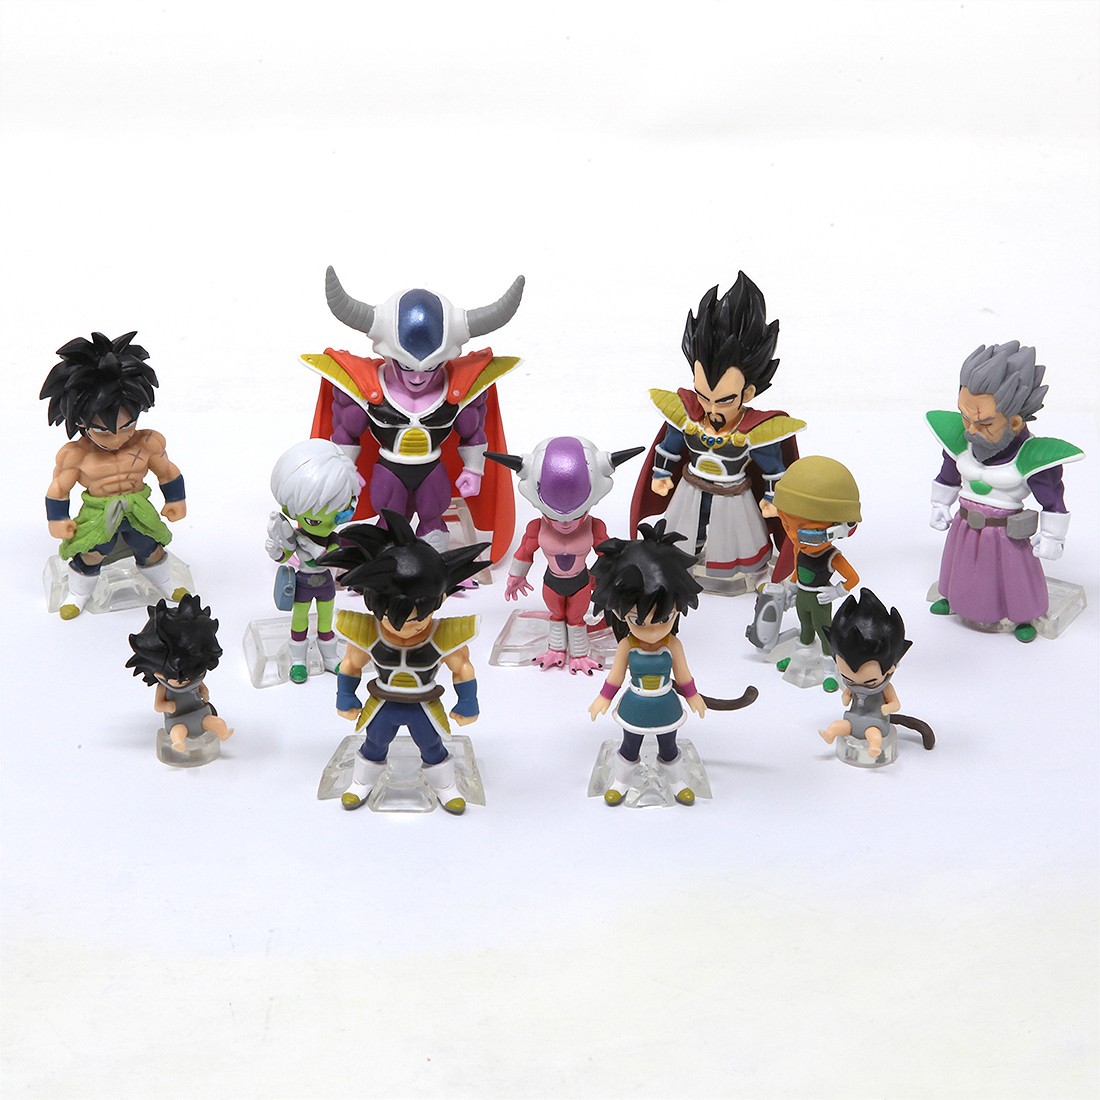 IN STOCK  Bandai Dragon Ball Super ADVERGE Part 11 Figure Set of 6 